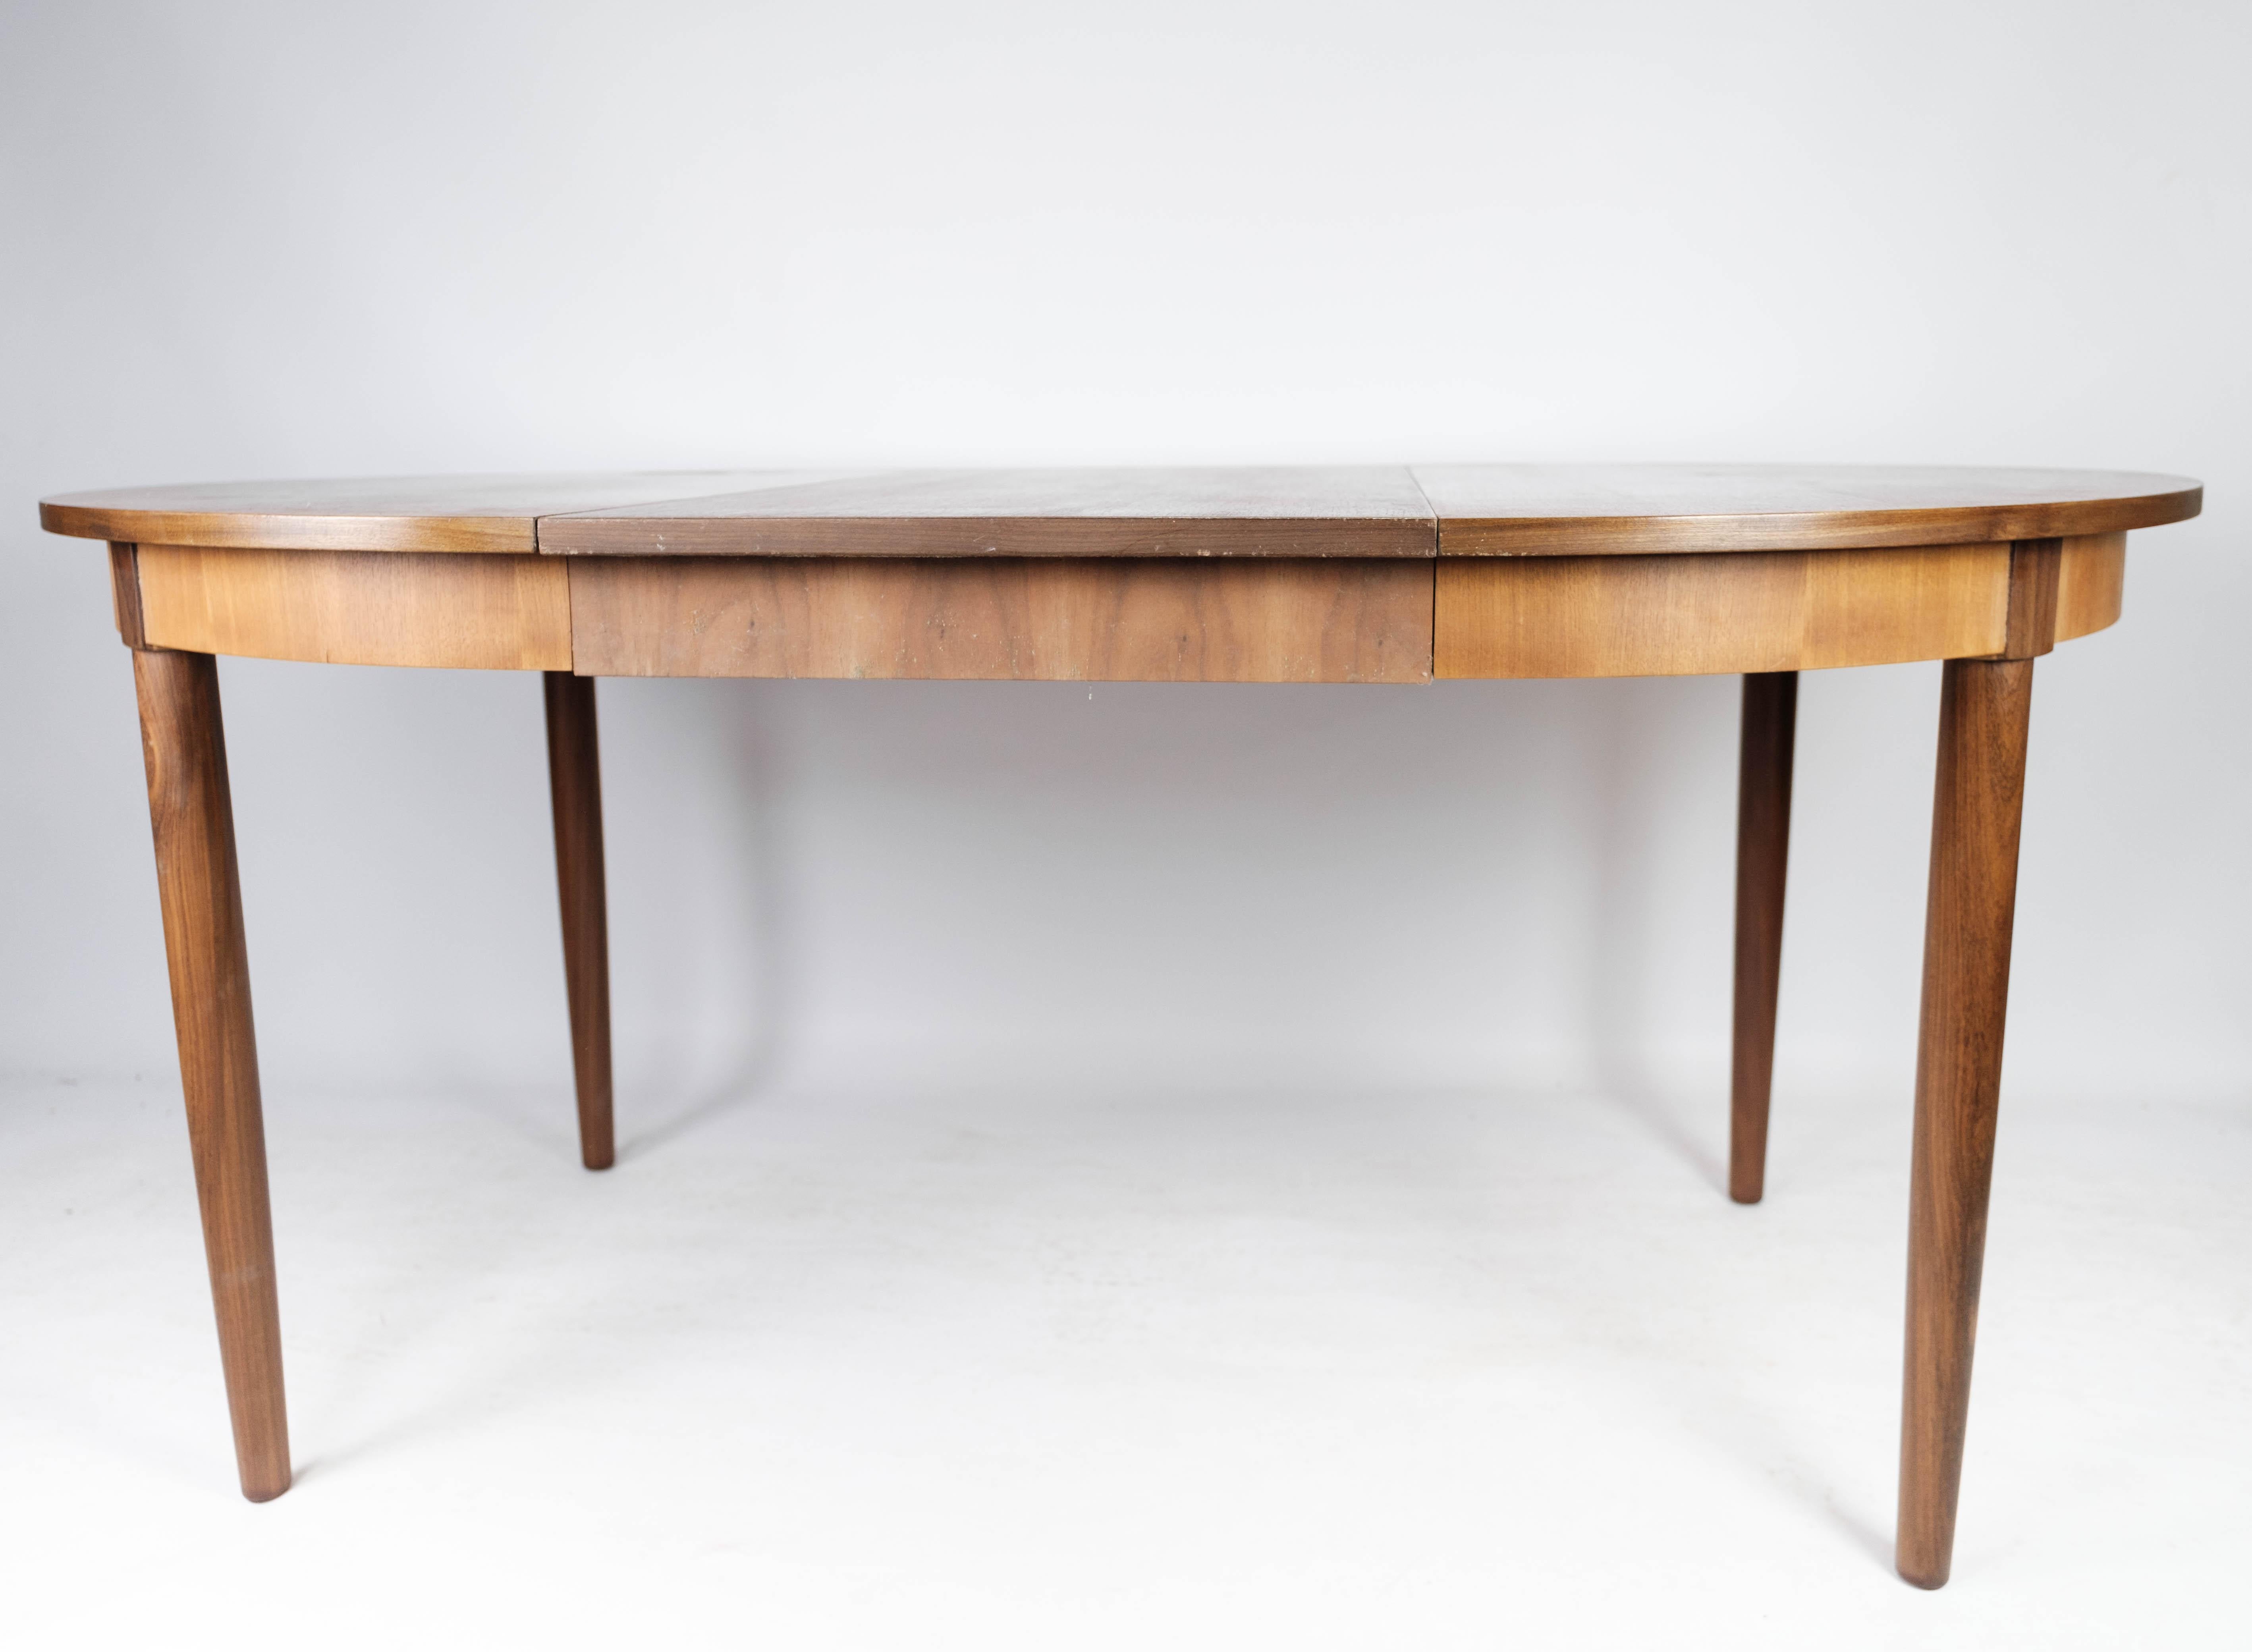 Dining Table Made In Teak With Extensions, Danish Design From 1960s For Sale 5